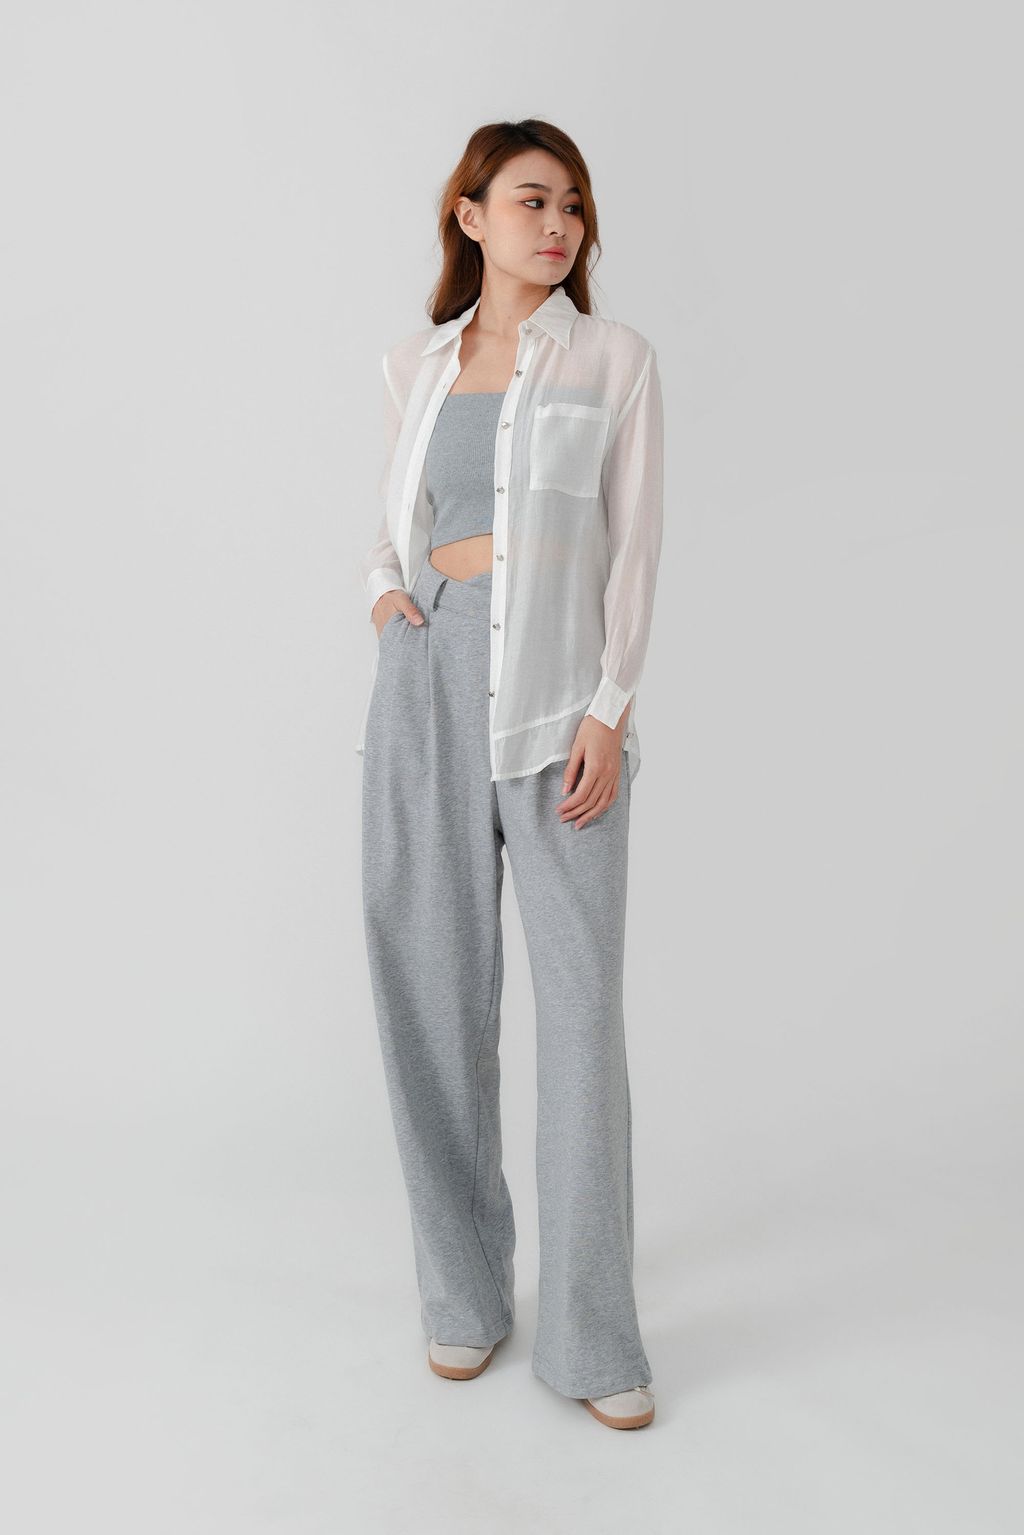 Carey Cotton Relaxed Fit Pants12